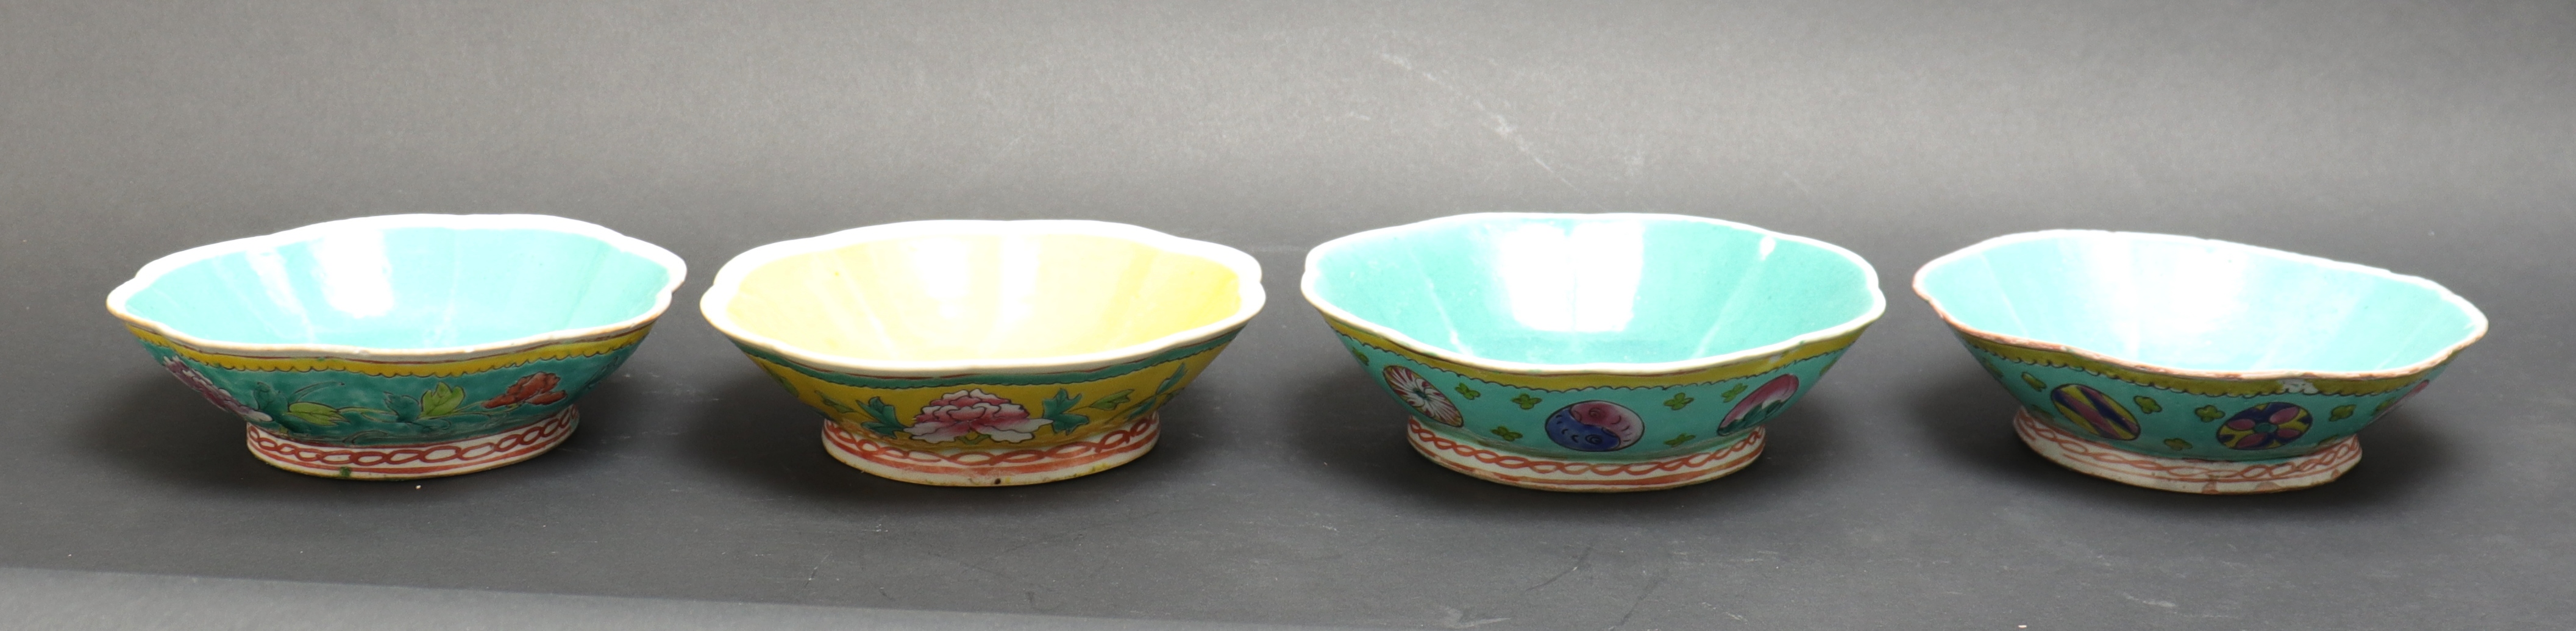 CHINESE POLYCHROME PORCELAIN BOWLS,